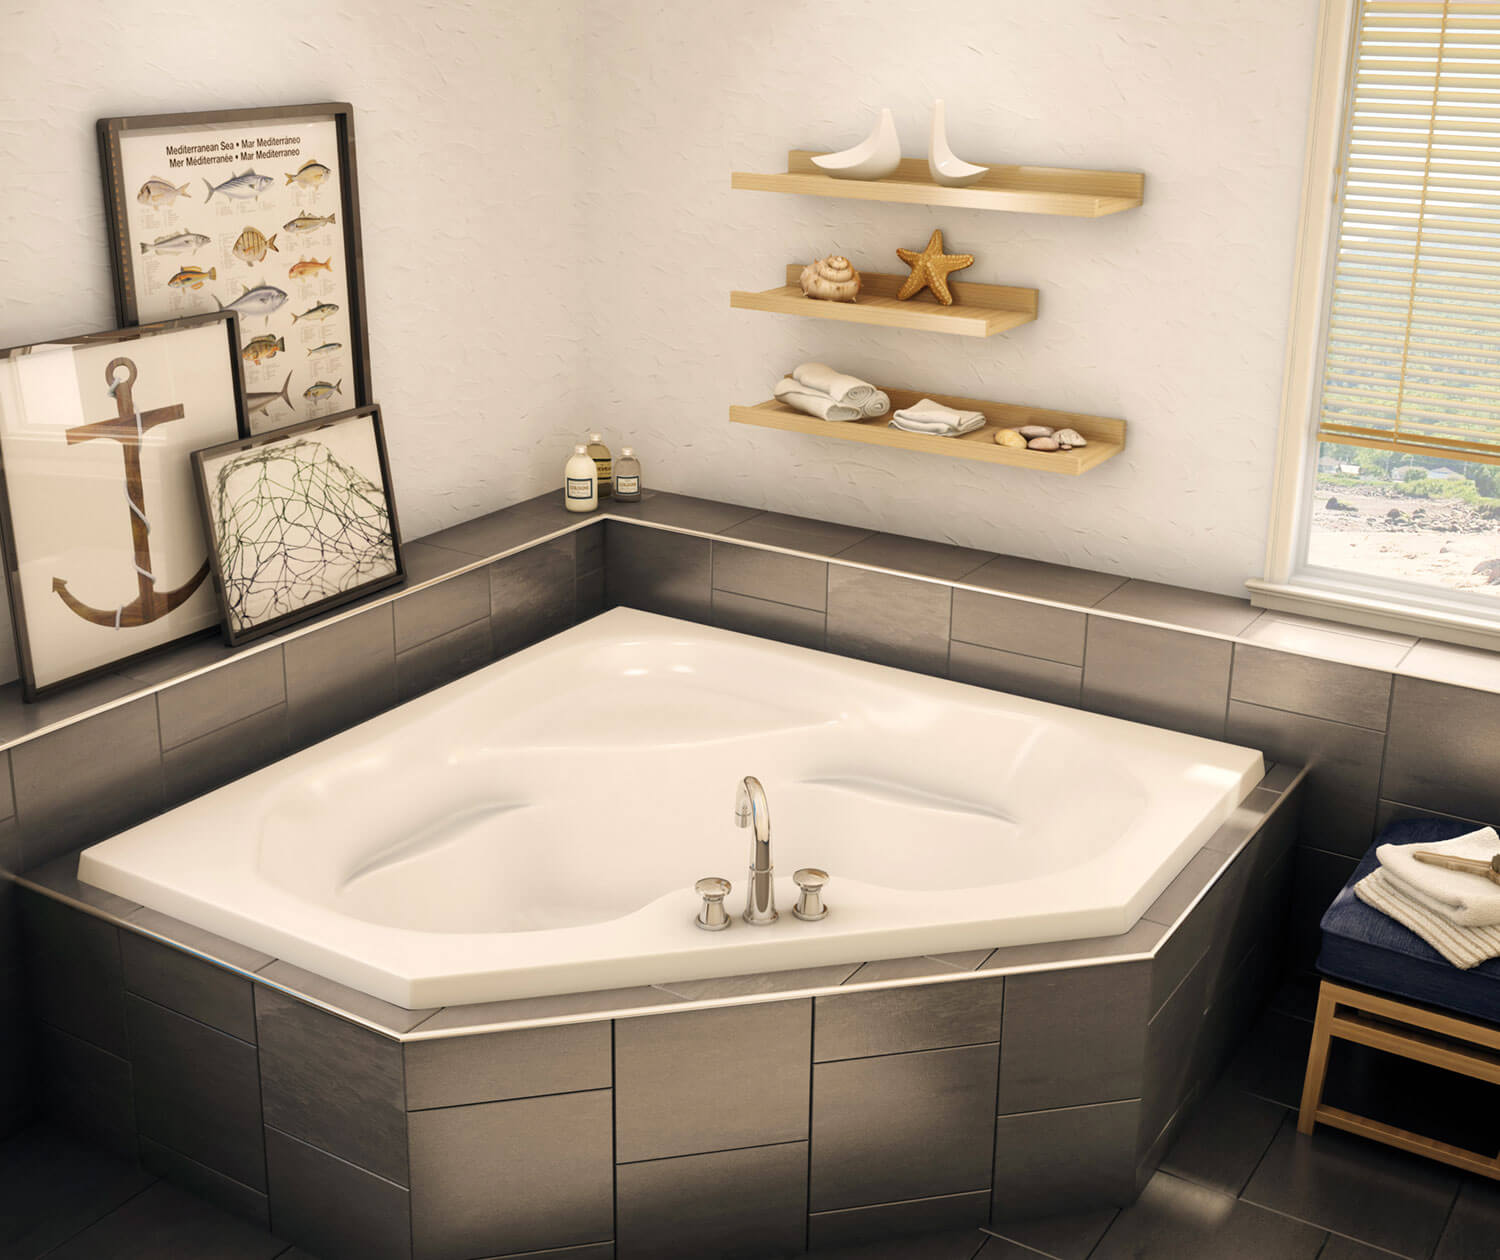 How to Decorate around a Jacuzzi Tub